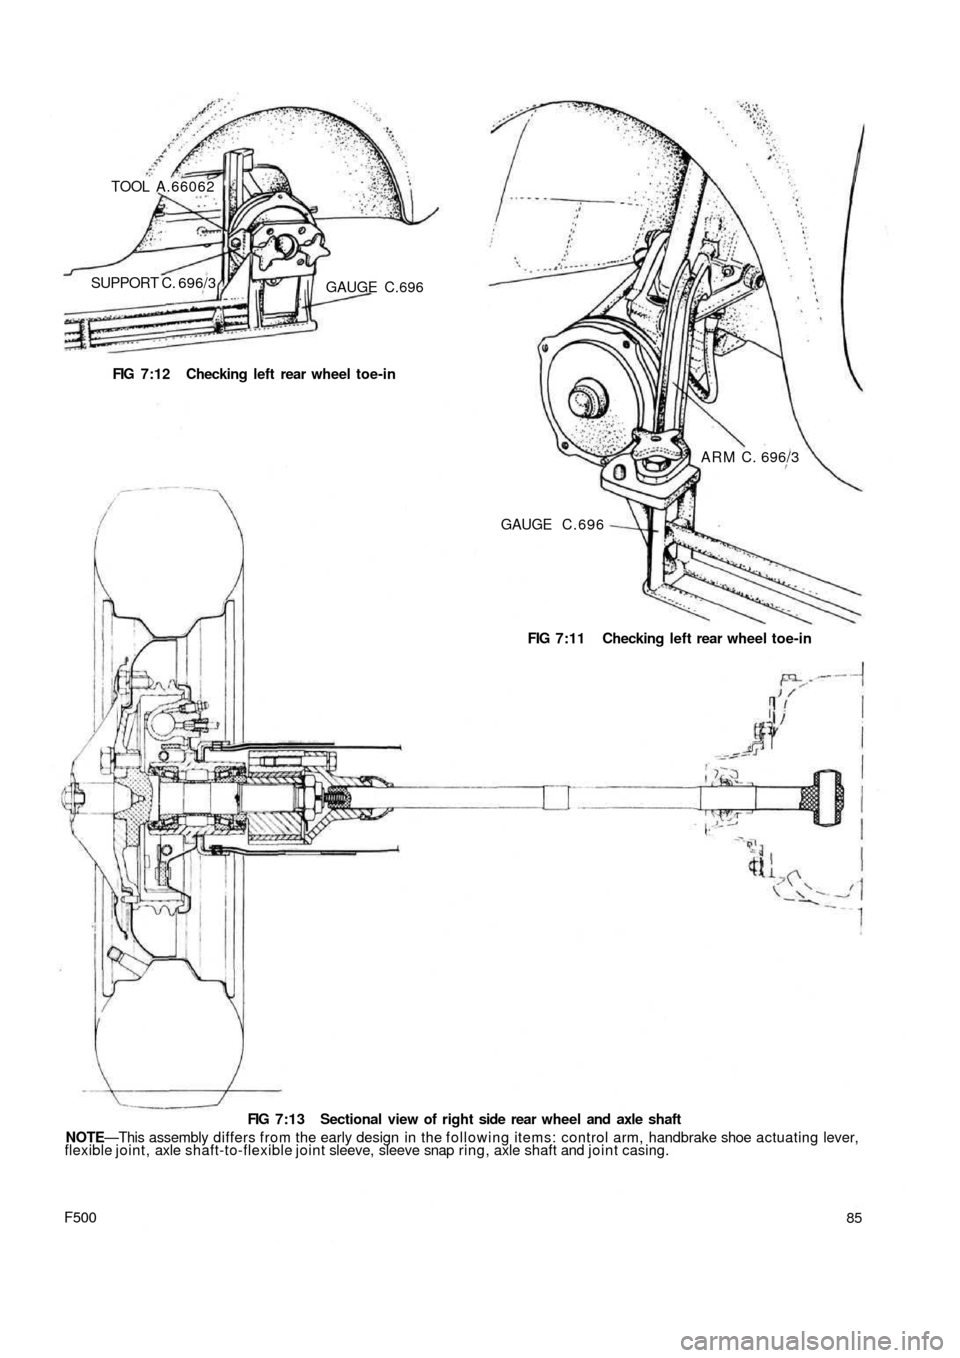 FIAT 500 1970 1.G Workshop Manual TOOL A.66062
SUPPORT C. 696/3GAUGE C.696
FIG 7:12 Checking left rear wheel toe-in
ARM C. 696/3
GAUGE C . 6 9 6
FIG 7:11 Checking left rear wheel toe-in
F500
FIG 7:13 Sectional view of right side rear 